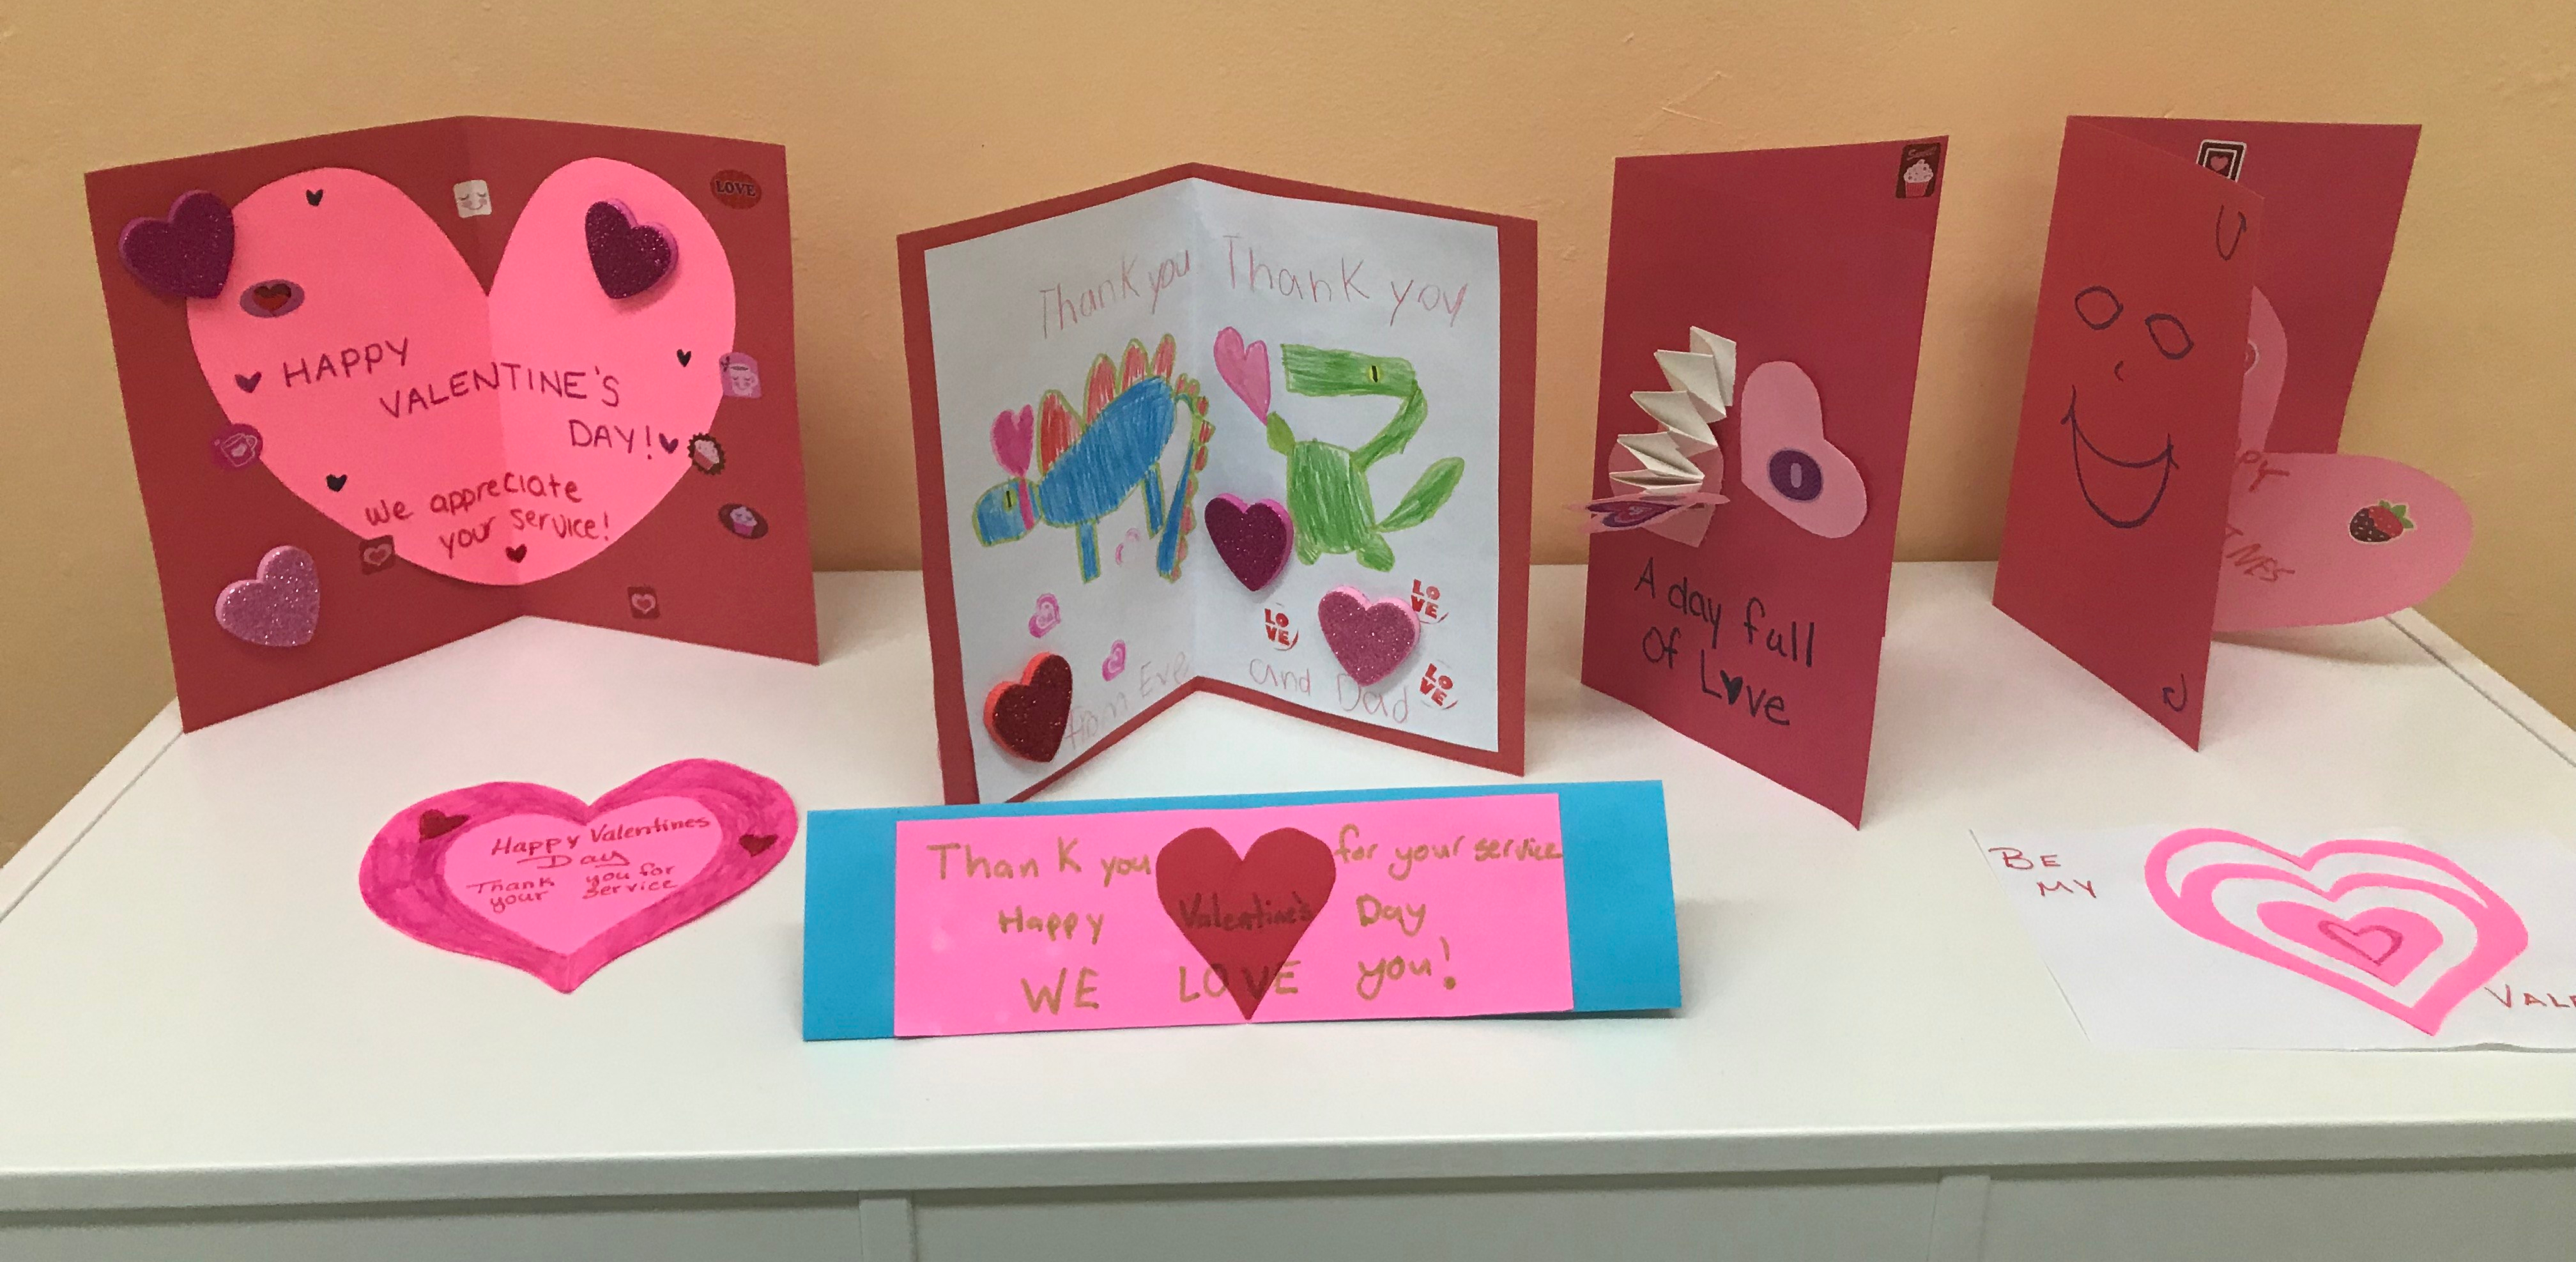 Bunker Valentine's Day cards displayed on a table.